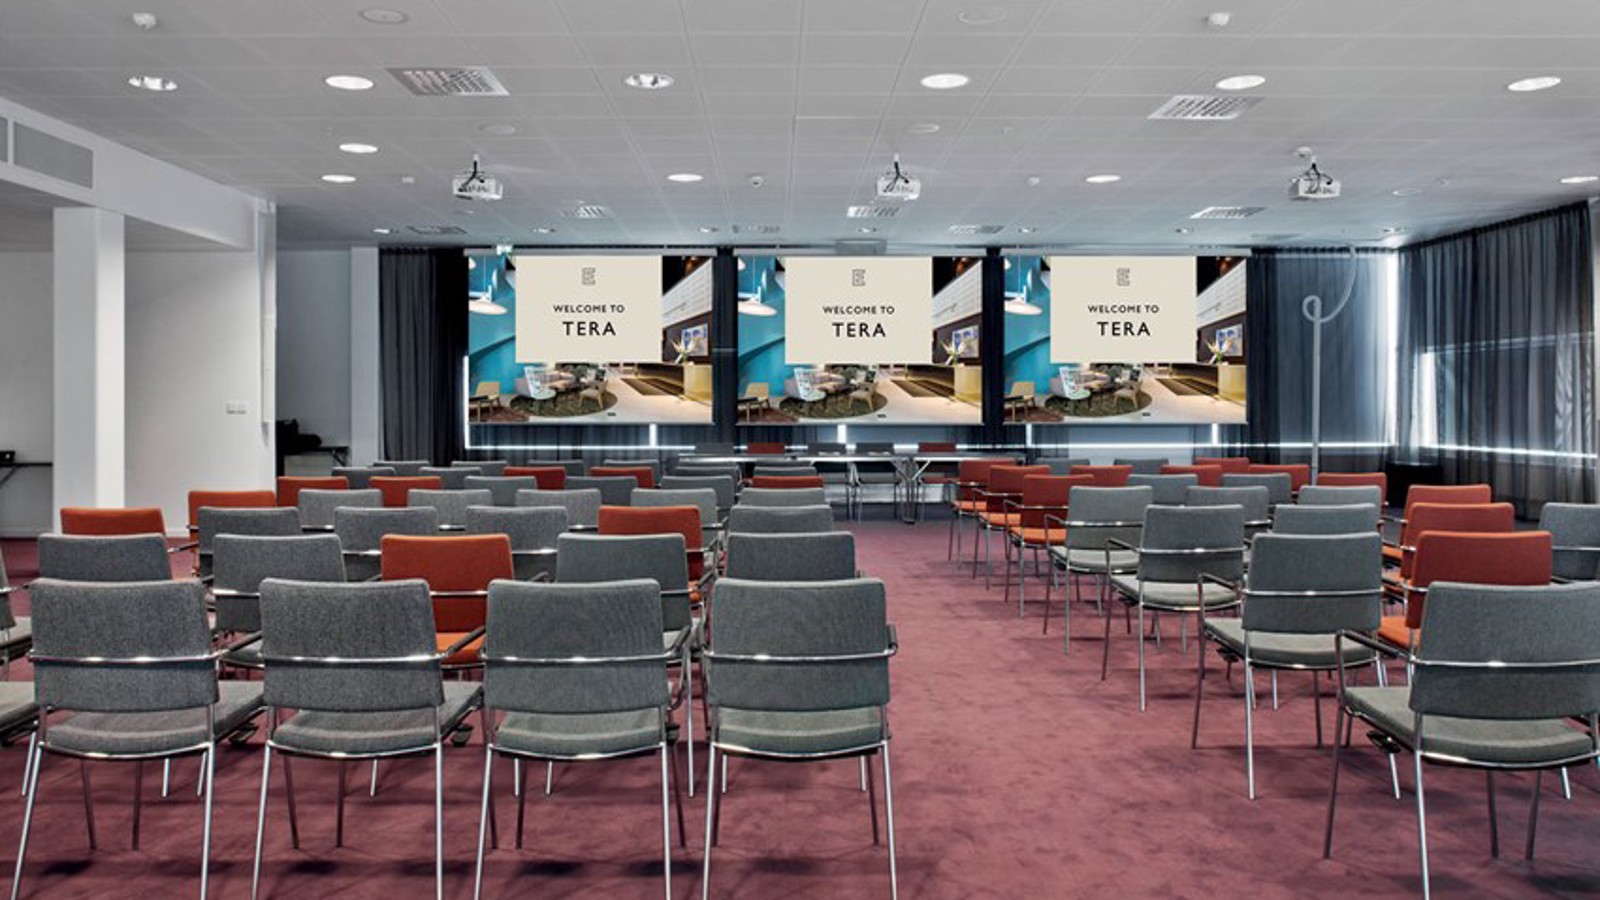 Large conference room with cinema seating and red carpet